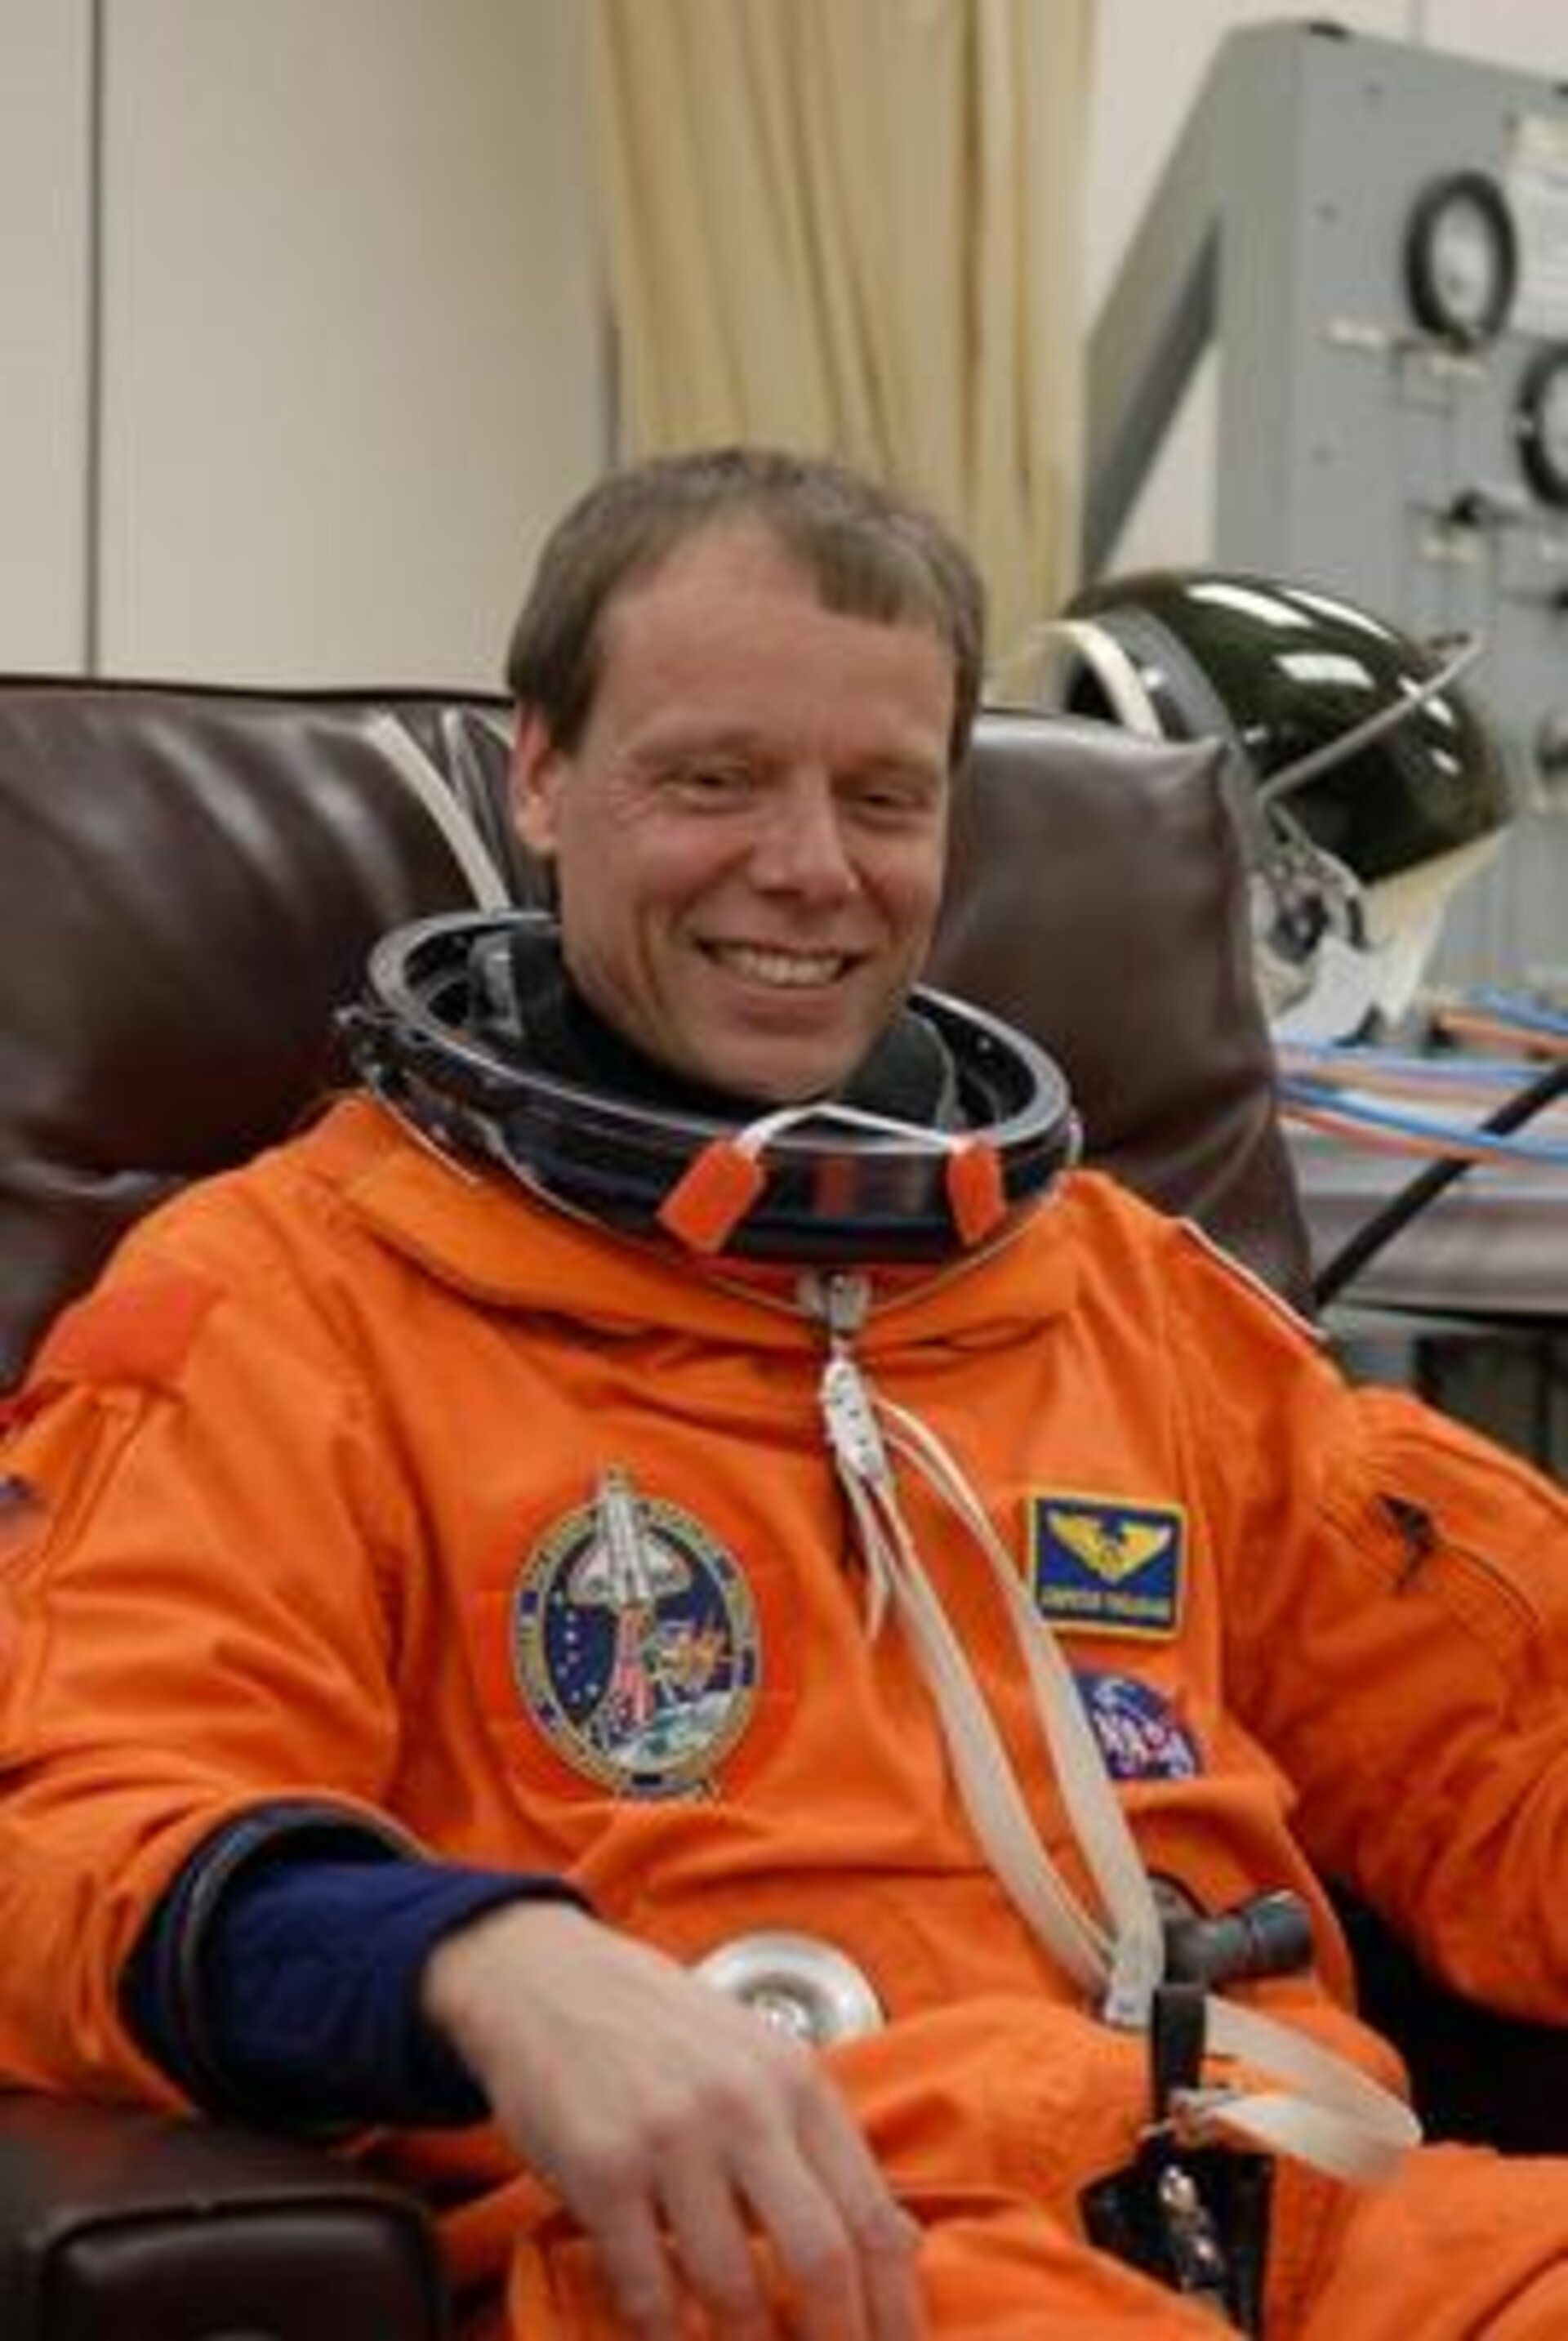 ESA astronaut Christer Fuglesang during suiting up before the launch